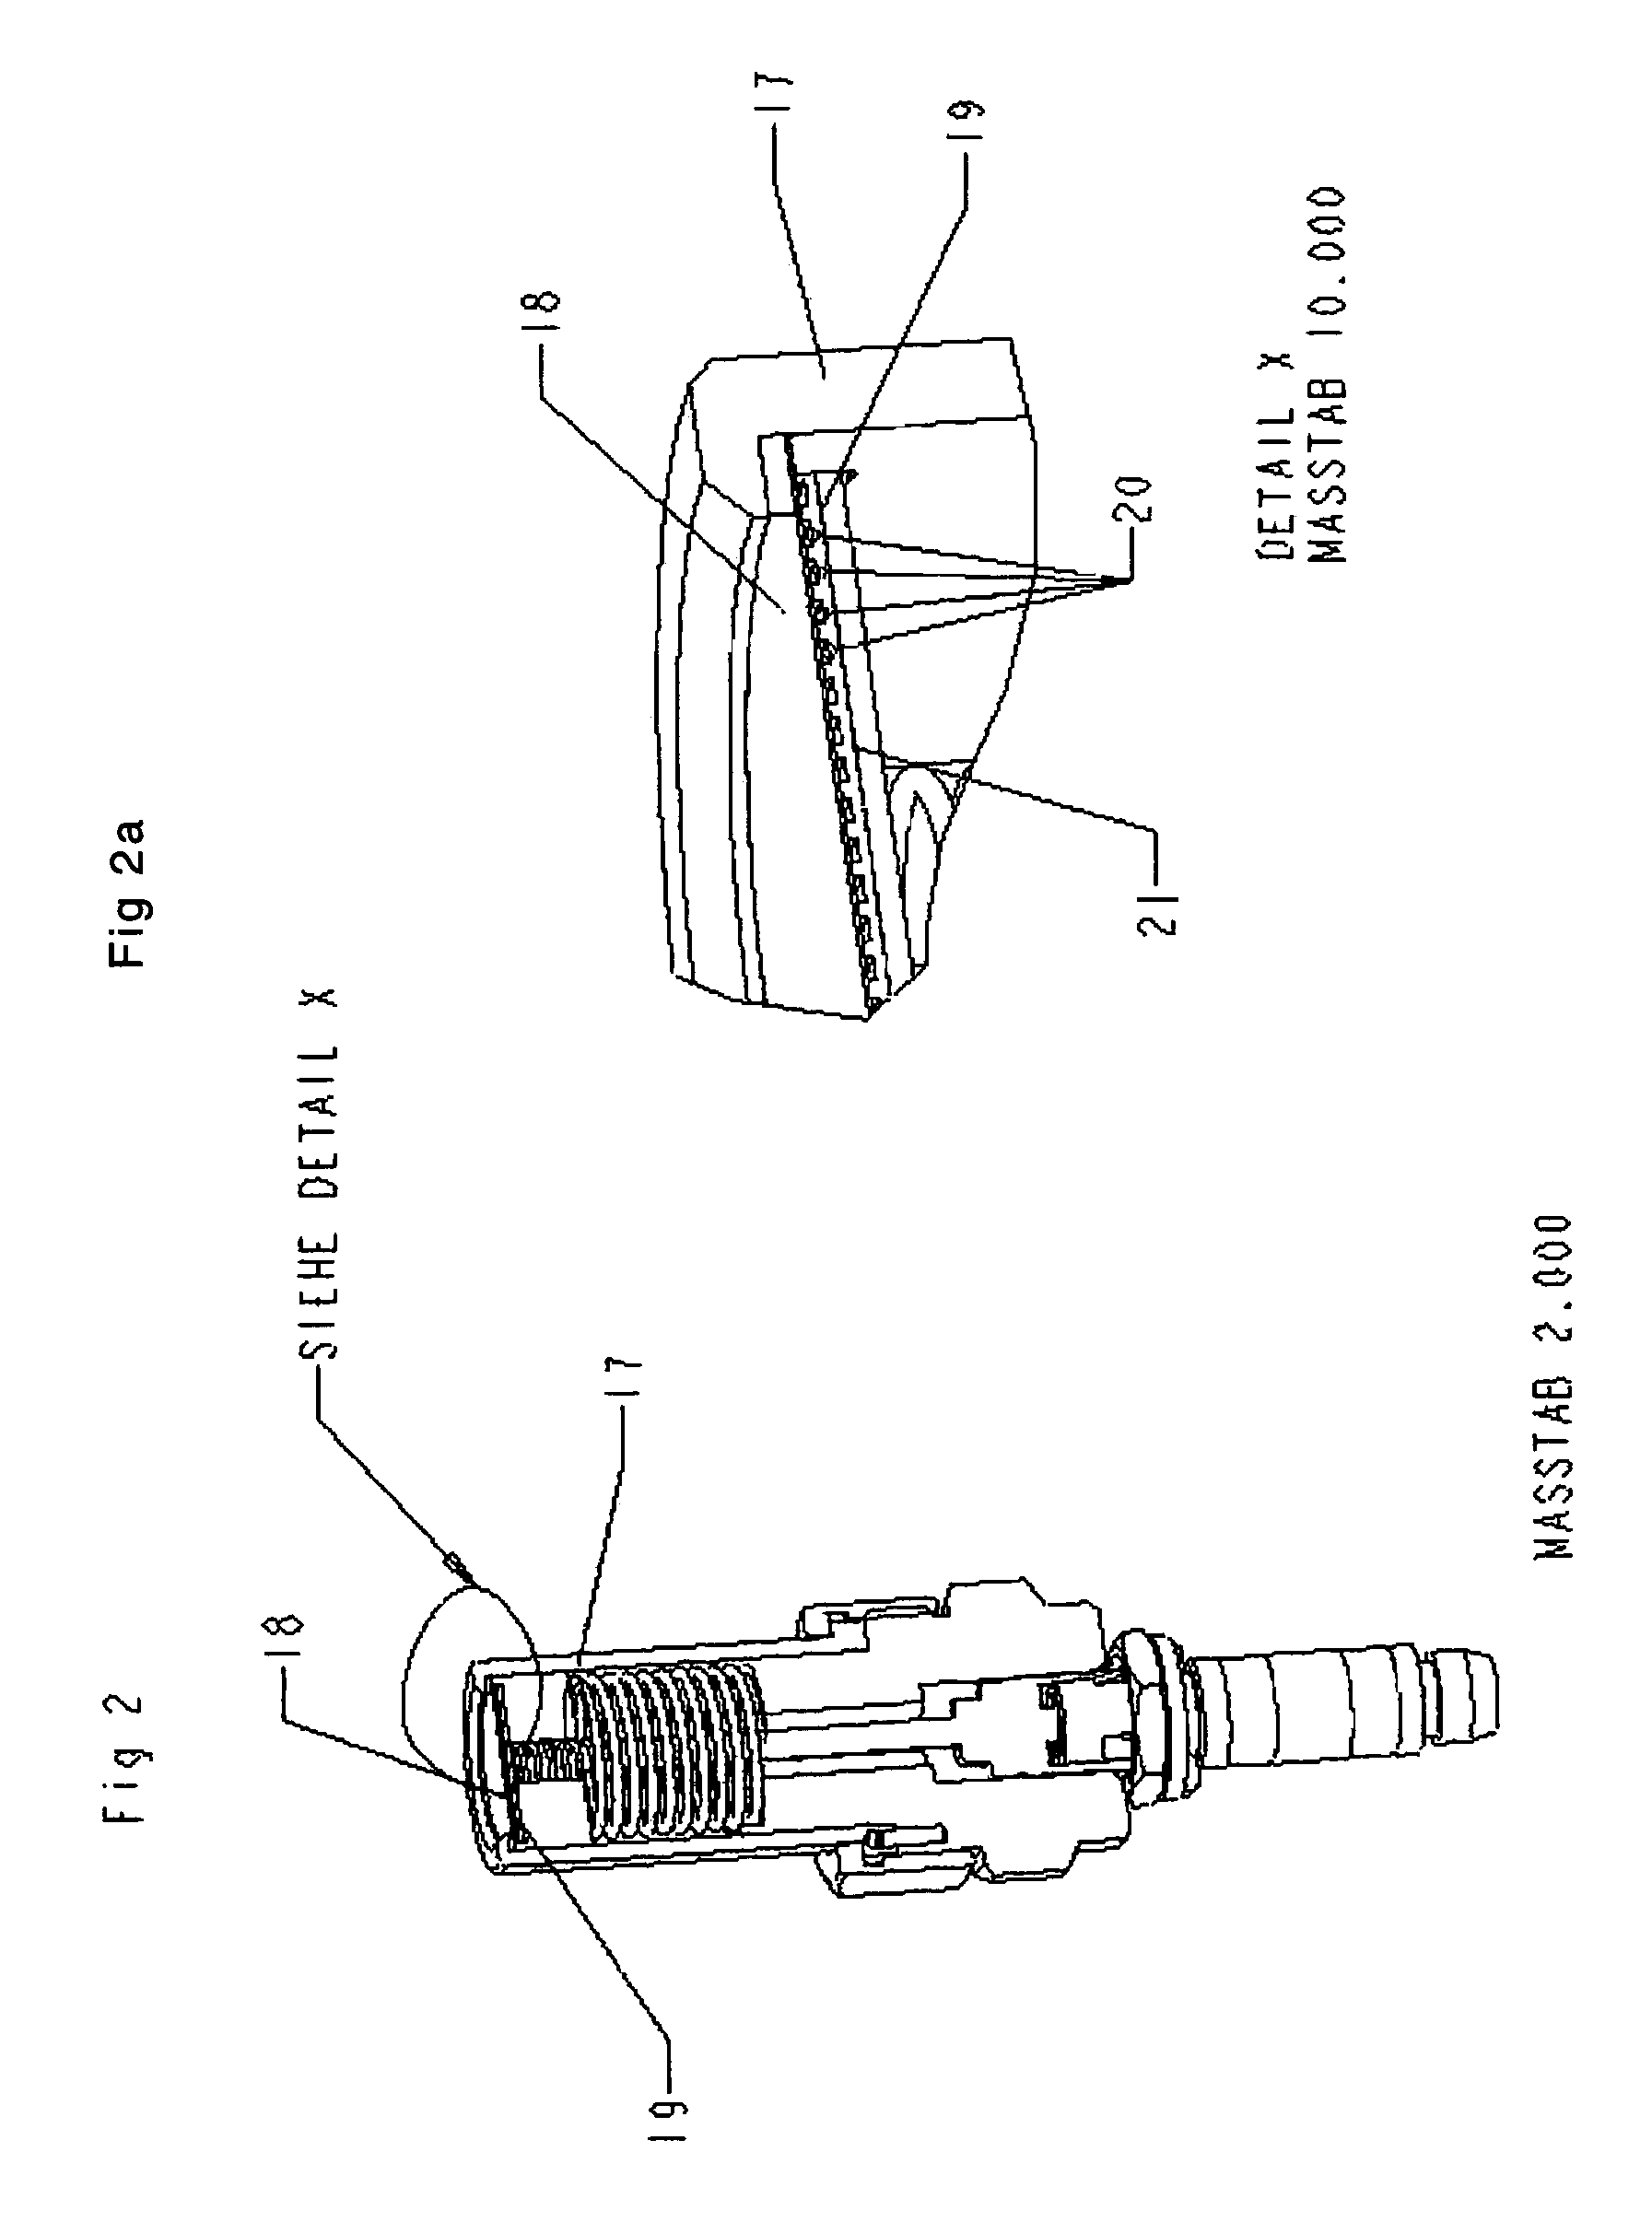 Ultrasonic gas flowmeter as well as device to measure exhaust flows of internal combustion engines and method to determine flow of gases